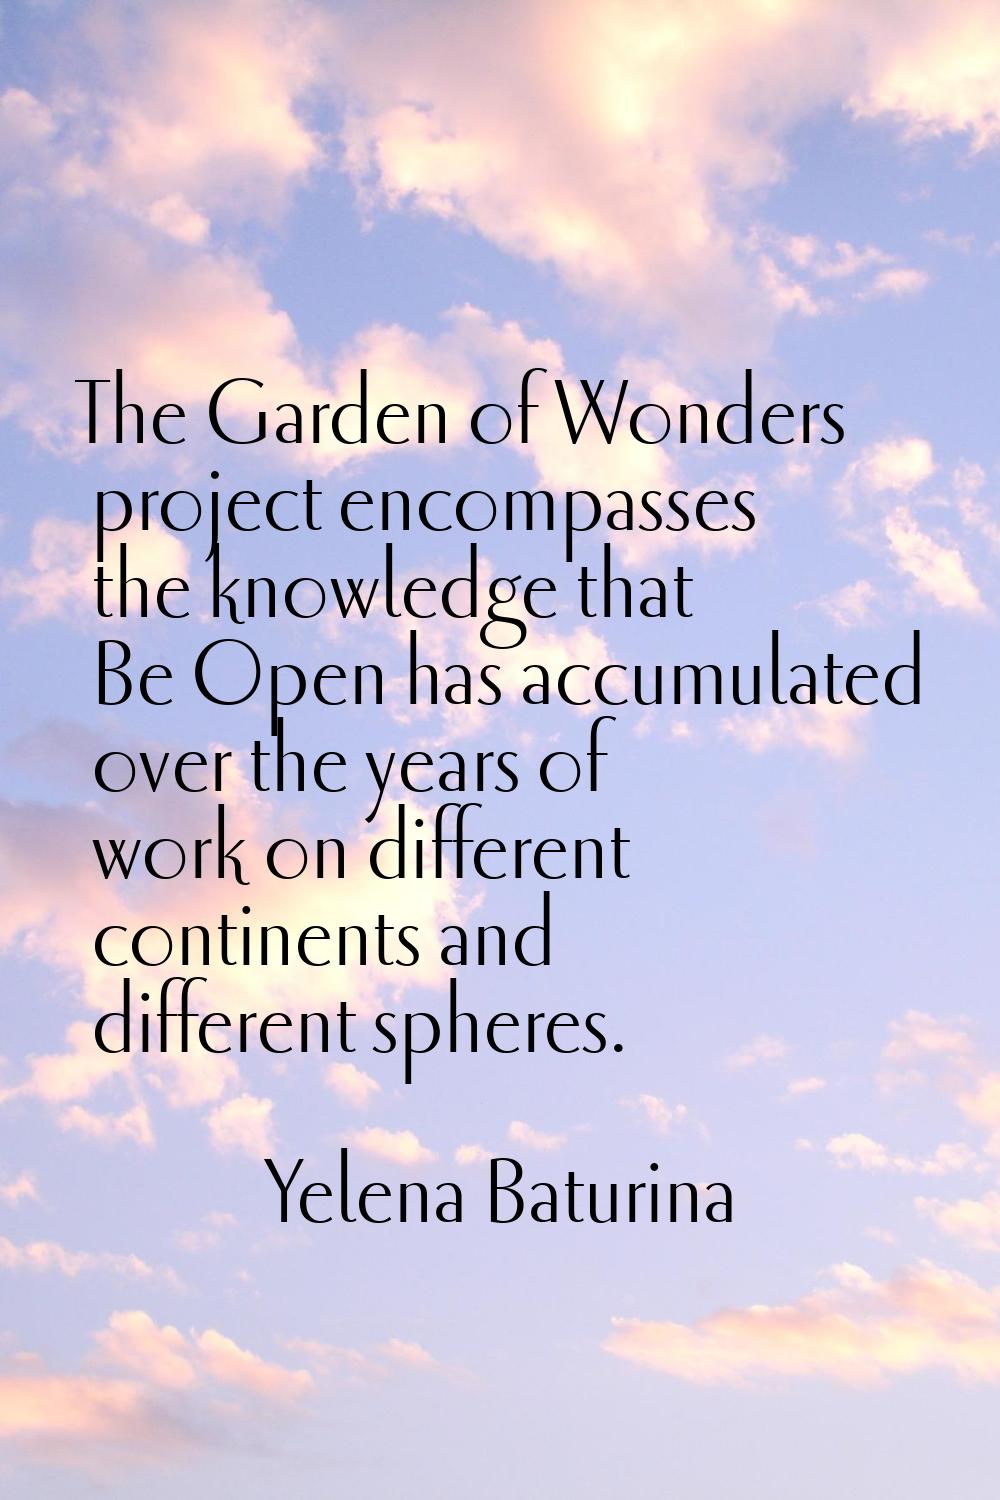 The Garden of Wonders project encompasses the knowledge that Be Open has accumulated over the years